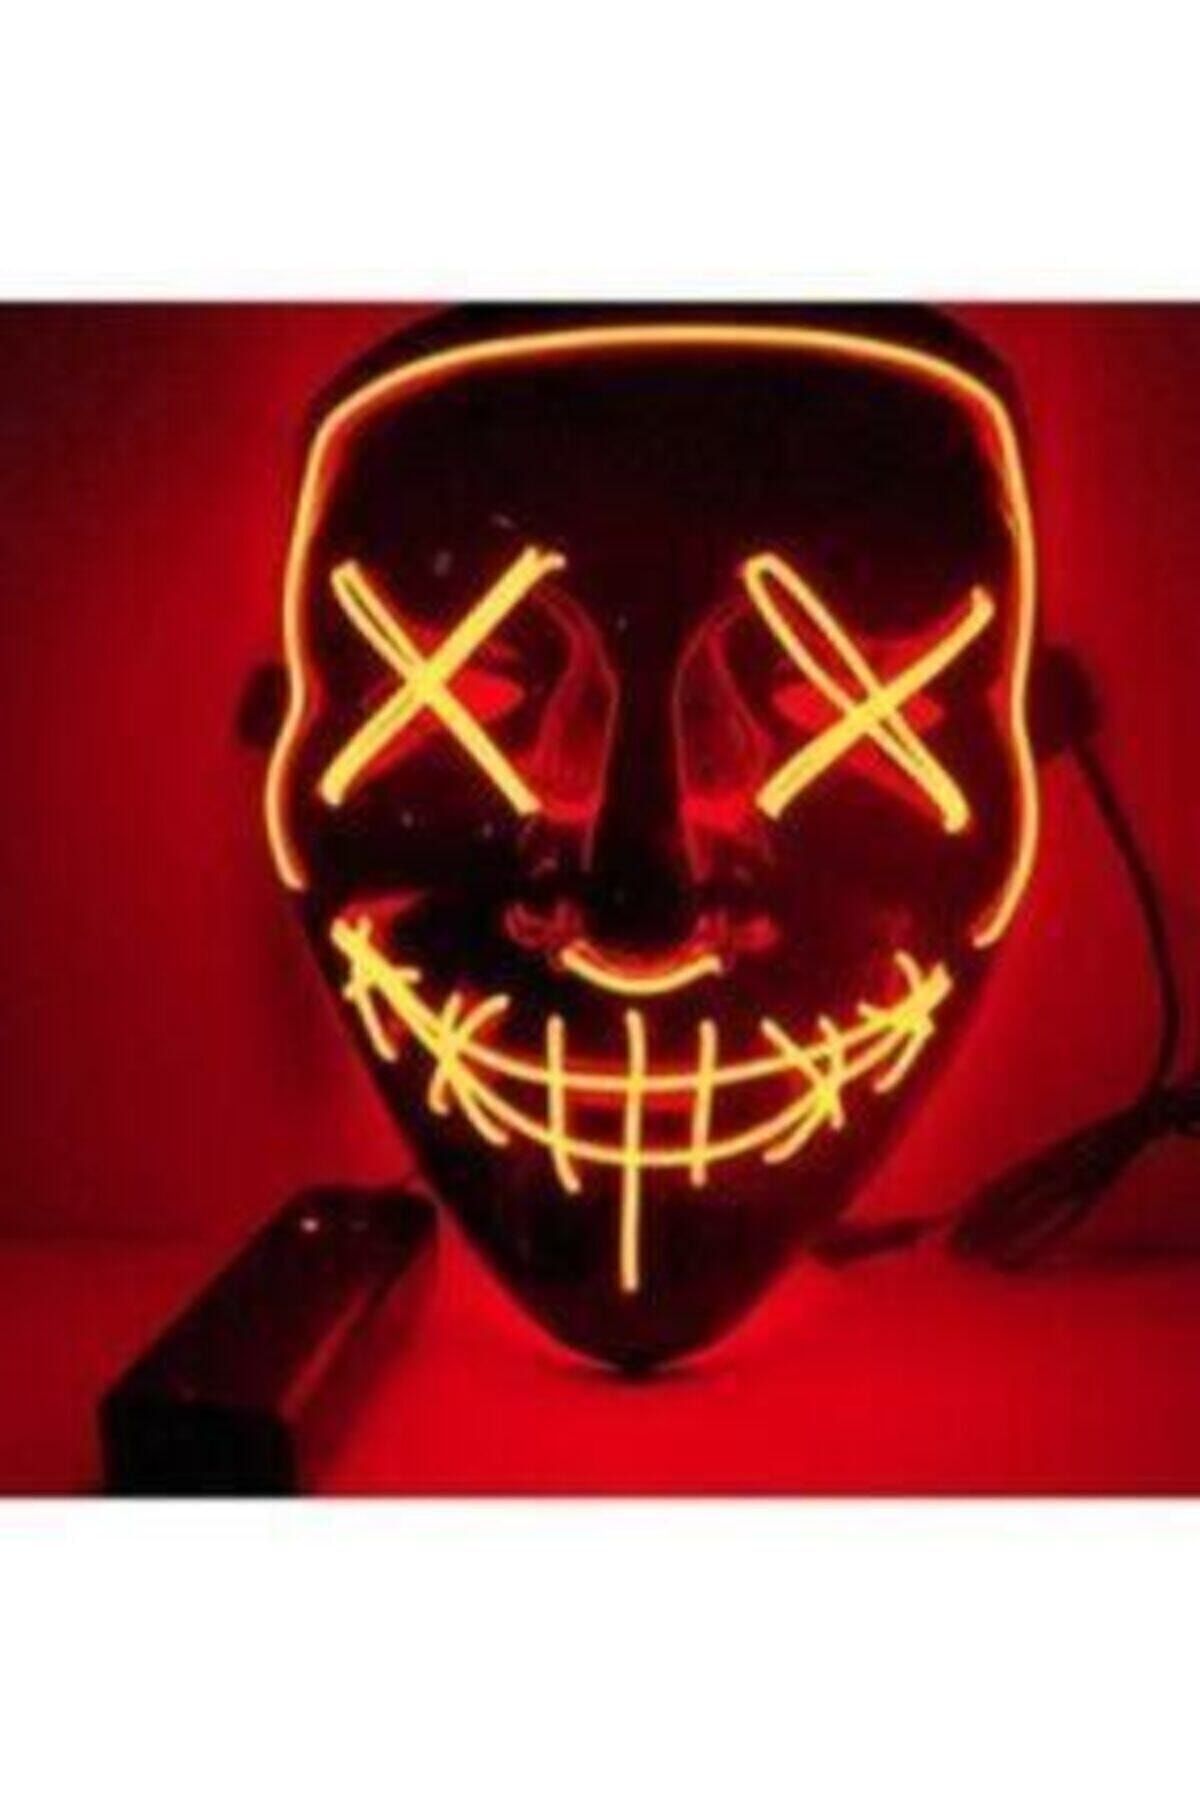 Hallowen Led Lighted Neon Mask 3 Modes Party Fun Mask